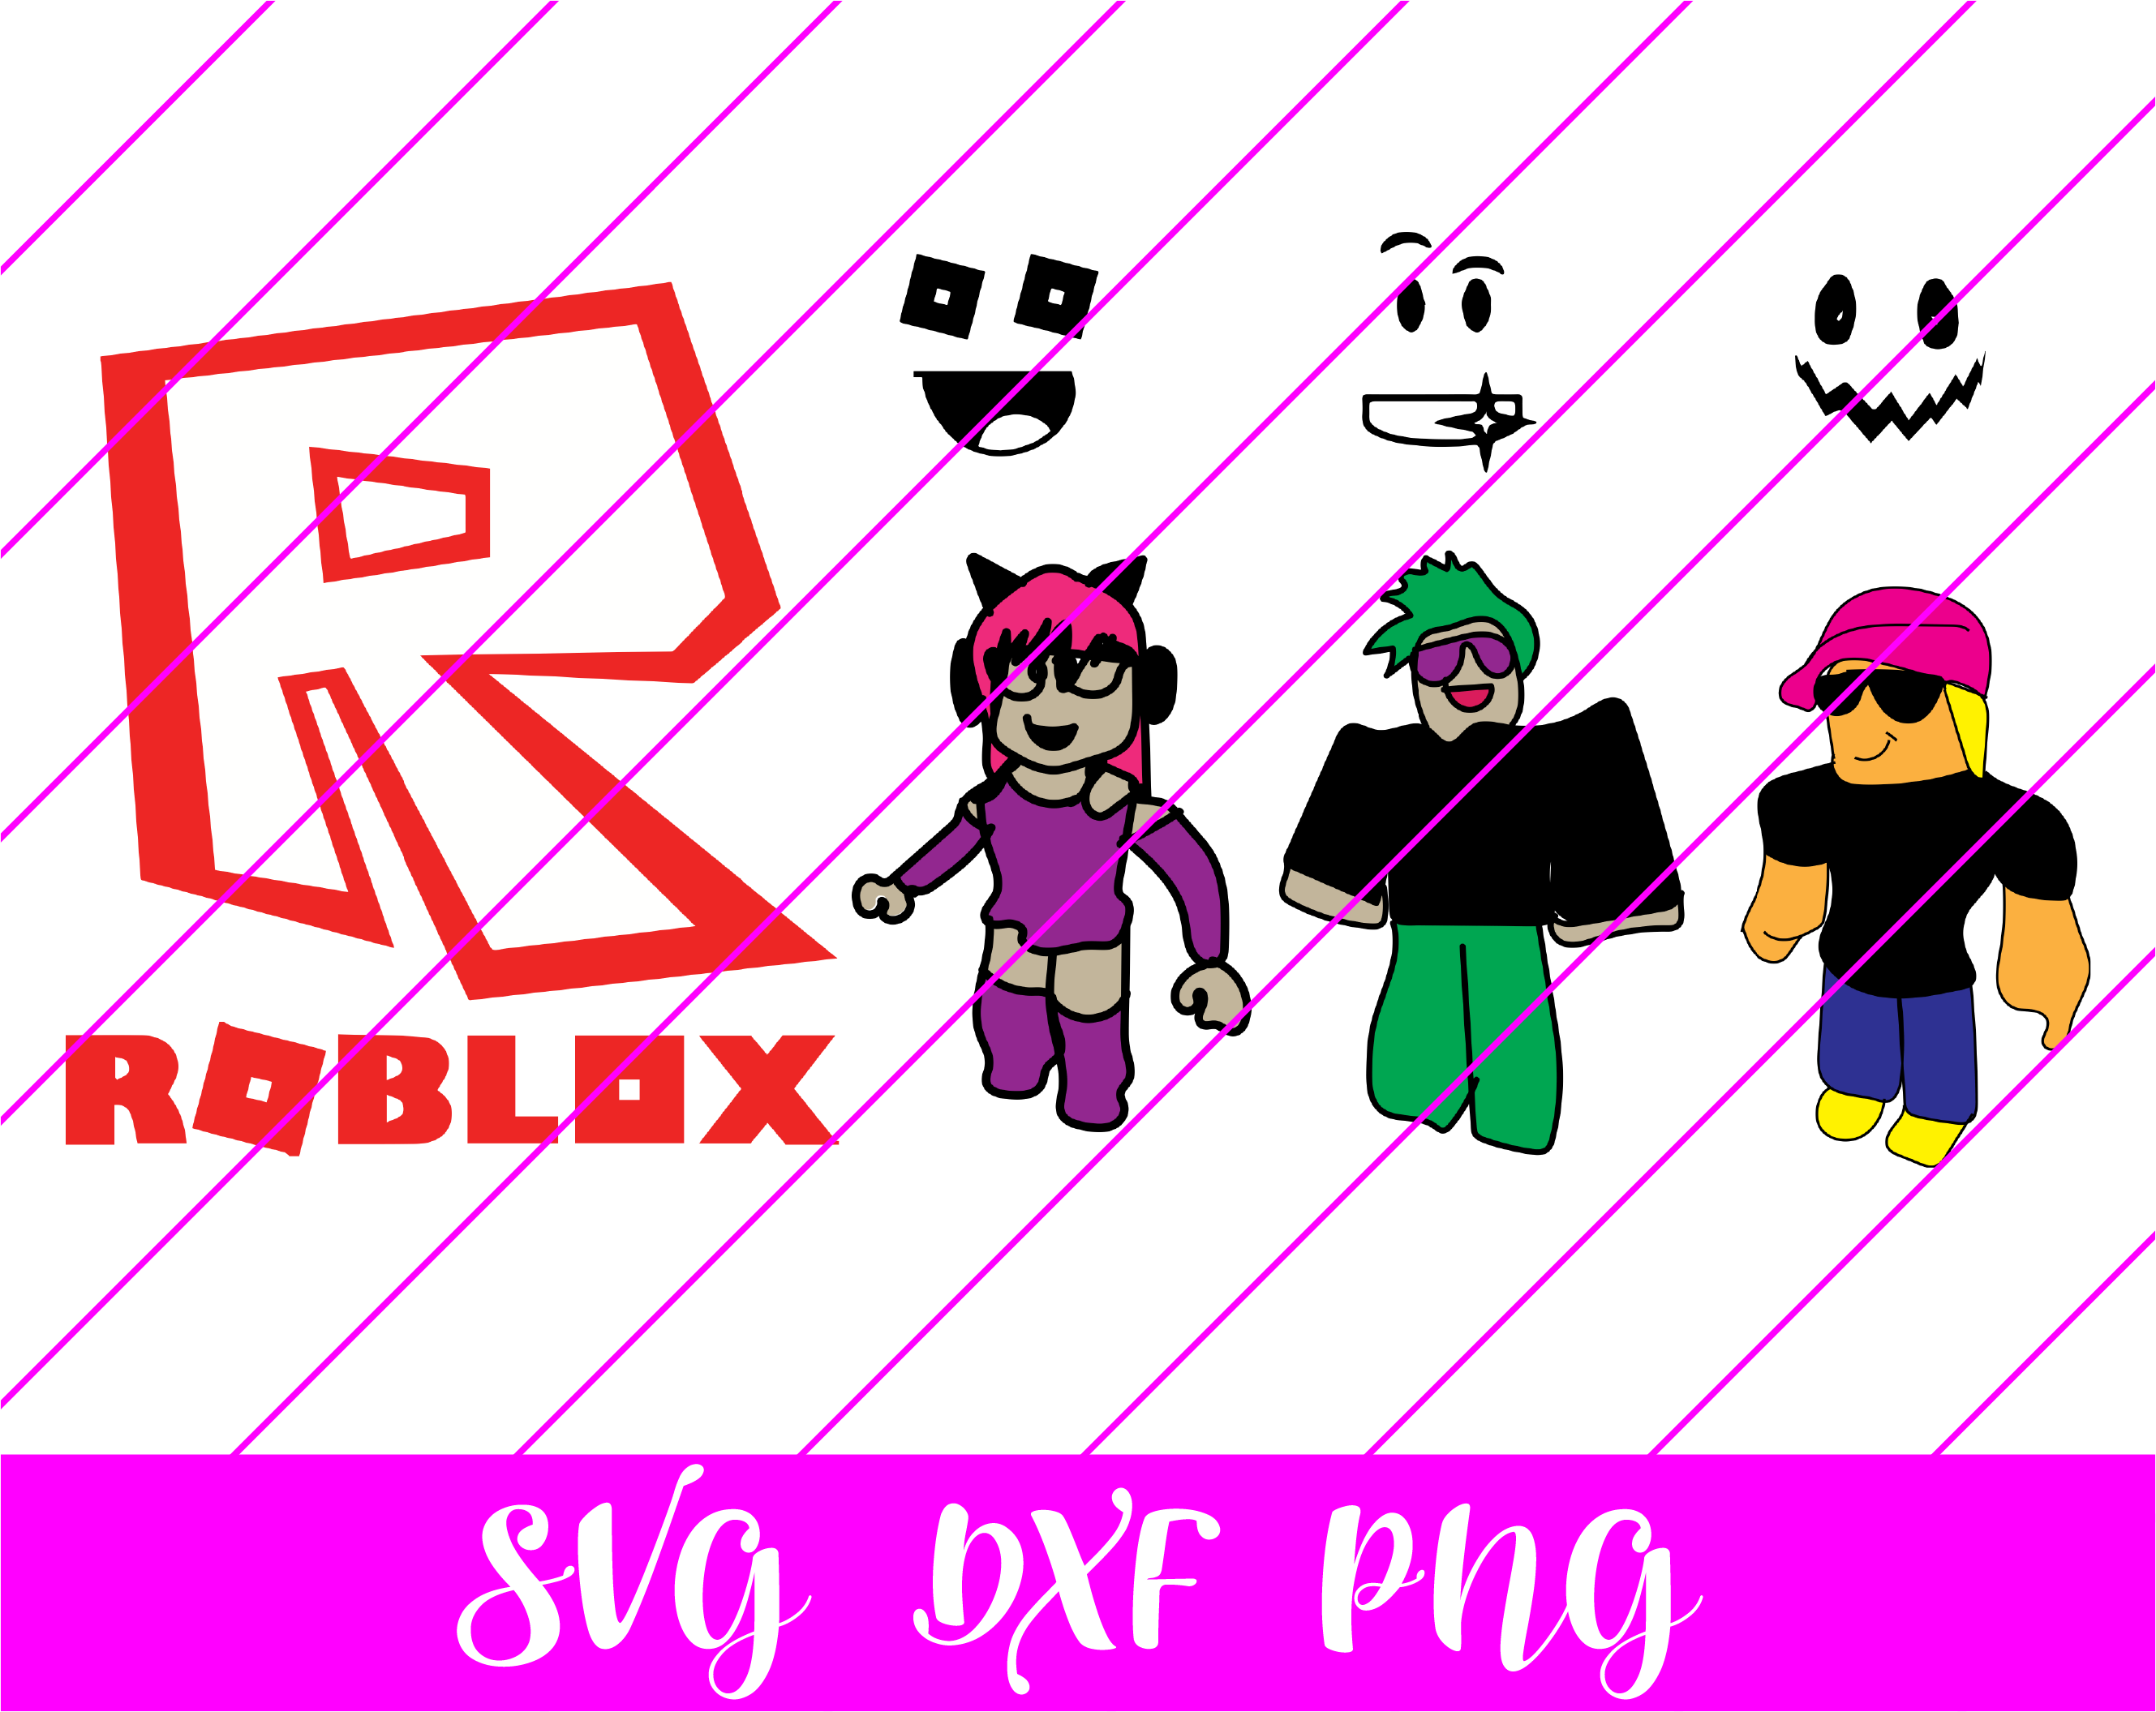 Roblox Svg Free Roblox Svg Download Svg Art - roblox characters 2020